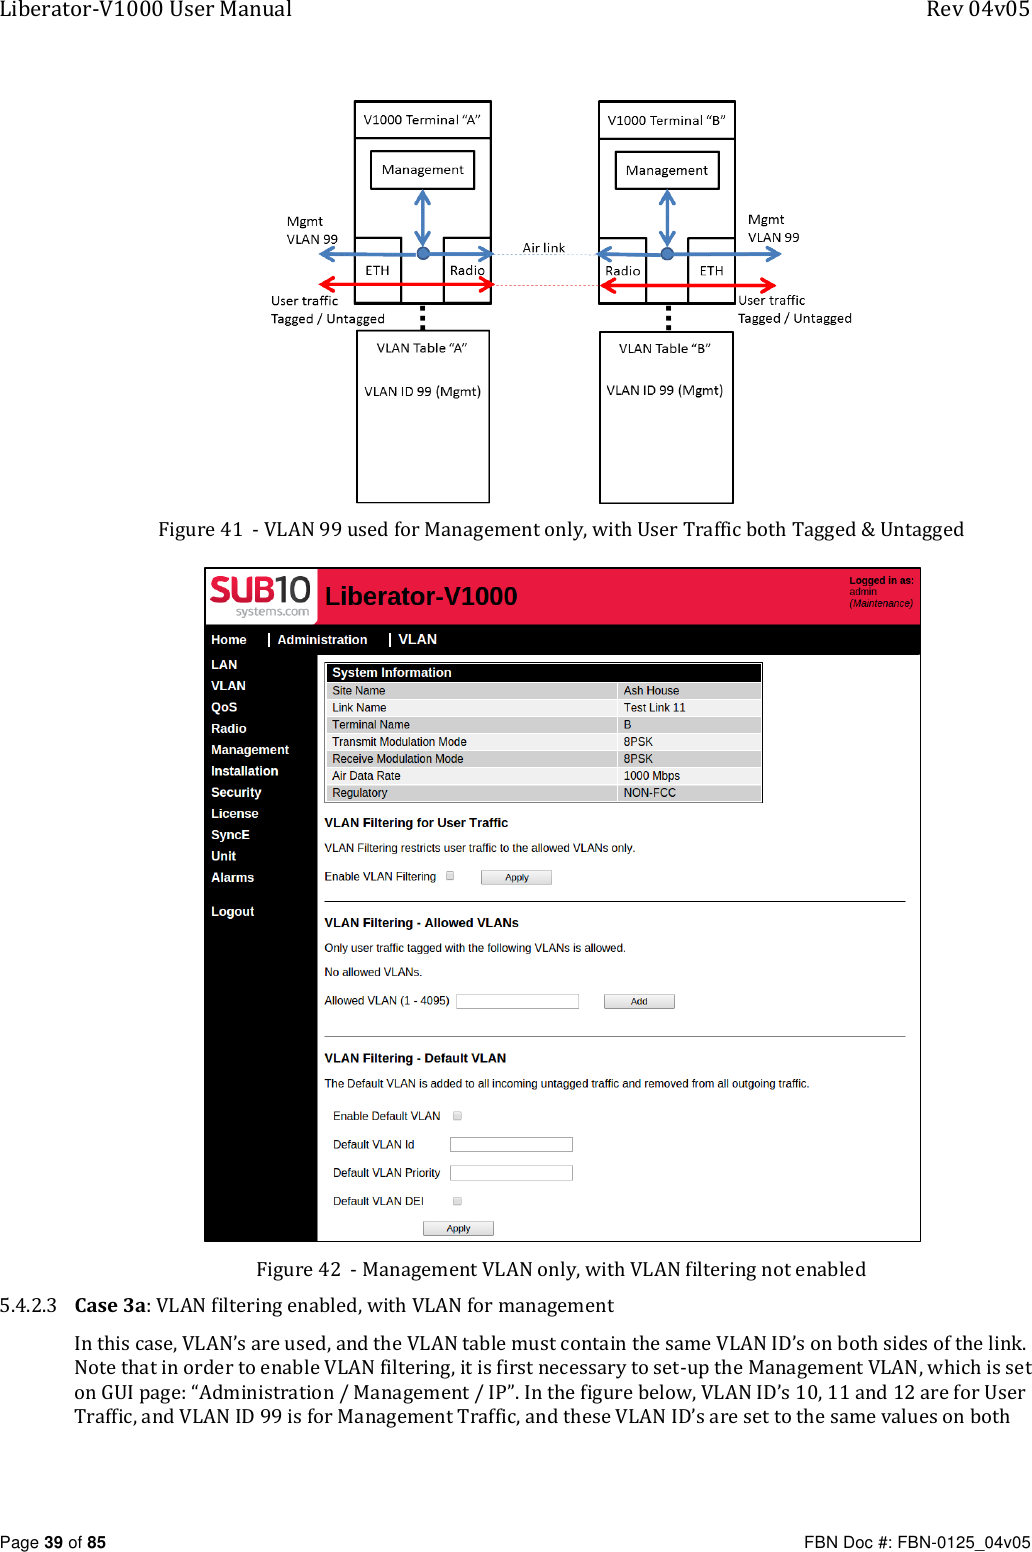 Liberator-V1000 User Manual  Rev 04v05     Page 39 of 85   FBN Doc #: FBN-0125_04v05  Figure 41  - VLAN 99 used for Management only, with User Traffic both Tagged &amp; Untagged  Figure 42  - Management VLAN only, with VLAN filtering not enabled 5.4.2.3 Case 3a: VLAN filtering enabled, with VLAN for management  In this case, VLAN’s are used, and the VLAN table must contain the same VLAN ID’s on both sides of the link. Note that in order to enable VLAN filtering, it is first necessary to set-up the Management VLAN, which is set on GUI page: “Administration / Management / IP”. In the figure below, VLAN ID’s 10, 11 and 12 are for User Traffic, and VLAN ID 99 is for Management Traffic, and these VLAN ID’s are set to the same values on both 